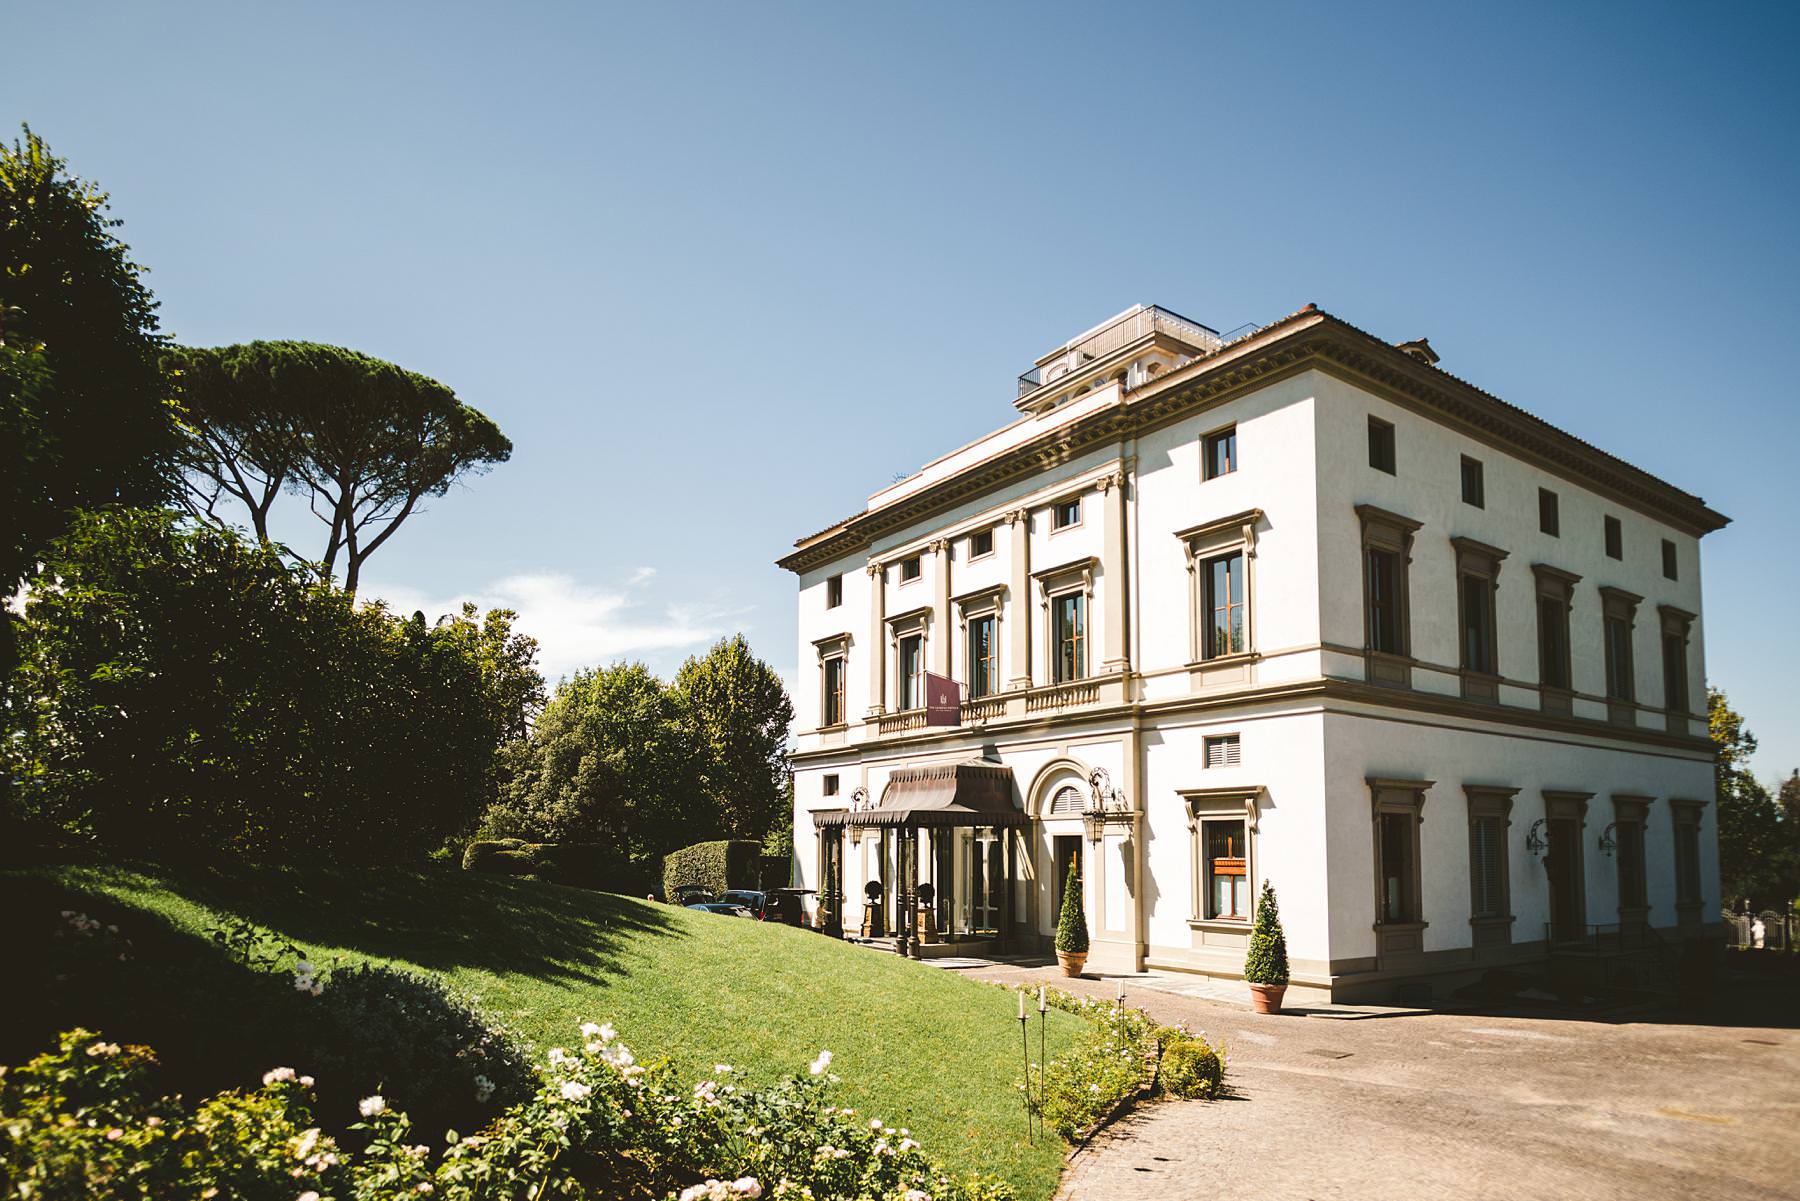 Grand Hotel Villa Cora in Florence, a luxury historical residence build by a family of aristocrats and surrounded by a centuries old park. ItÕs a perfect venue for a destination wedding or as starting point for a photo shoot in the city